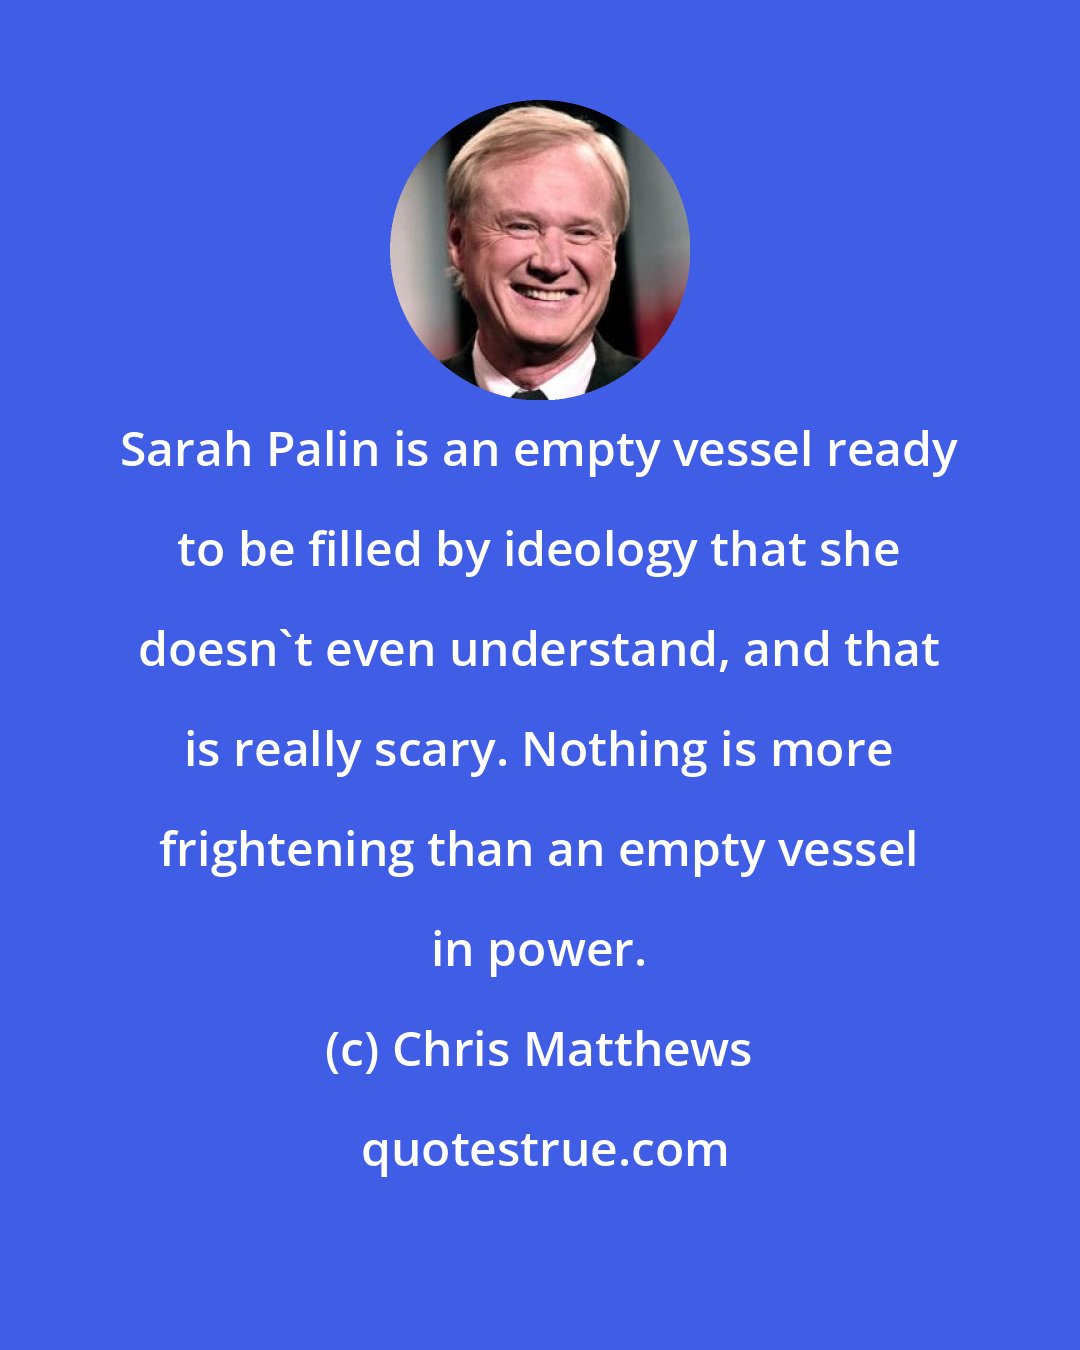 Chris Matthews: Sarah Palin is an empty vessel ready to be filled by ideology that she doesn't even understand, and that is really scary. Nothing is more frightening than an empty vessel in power.